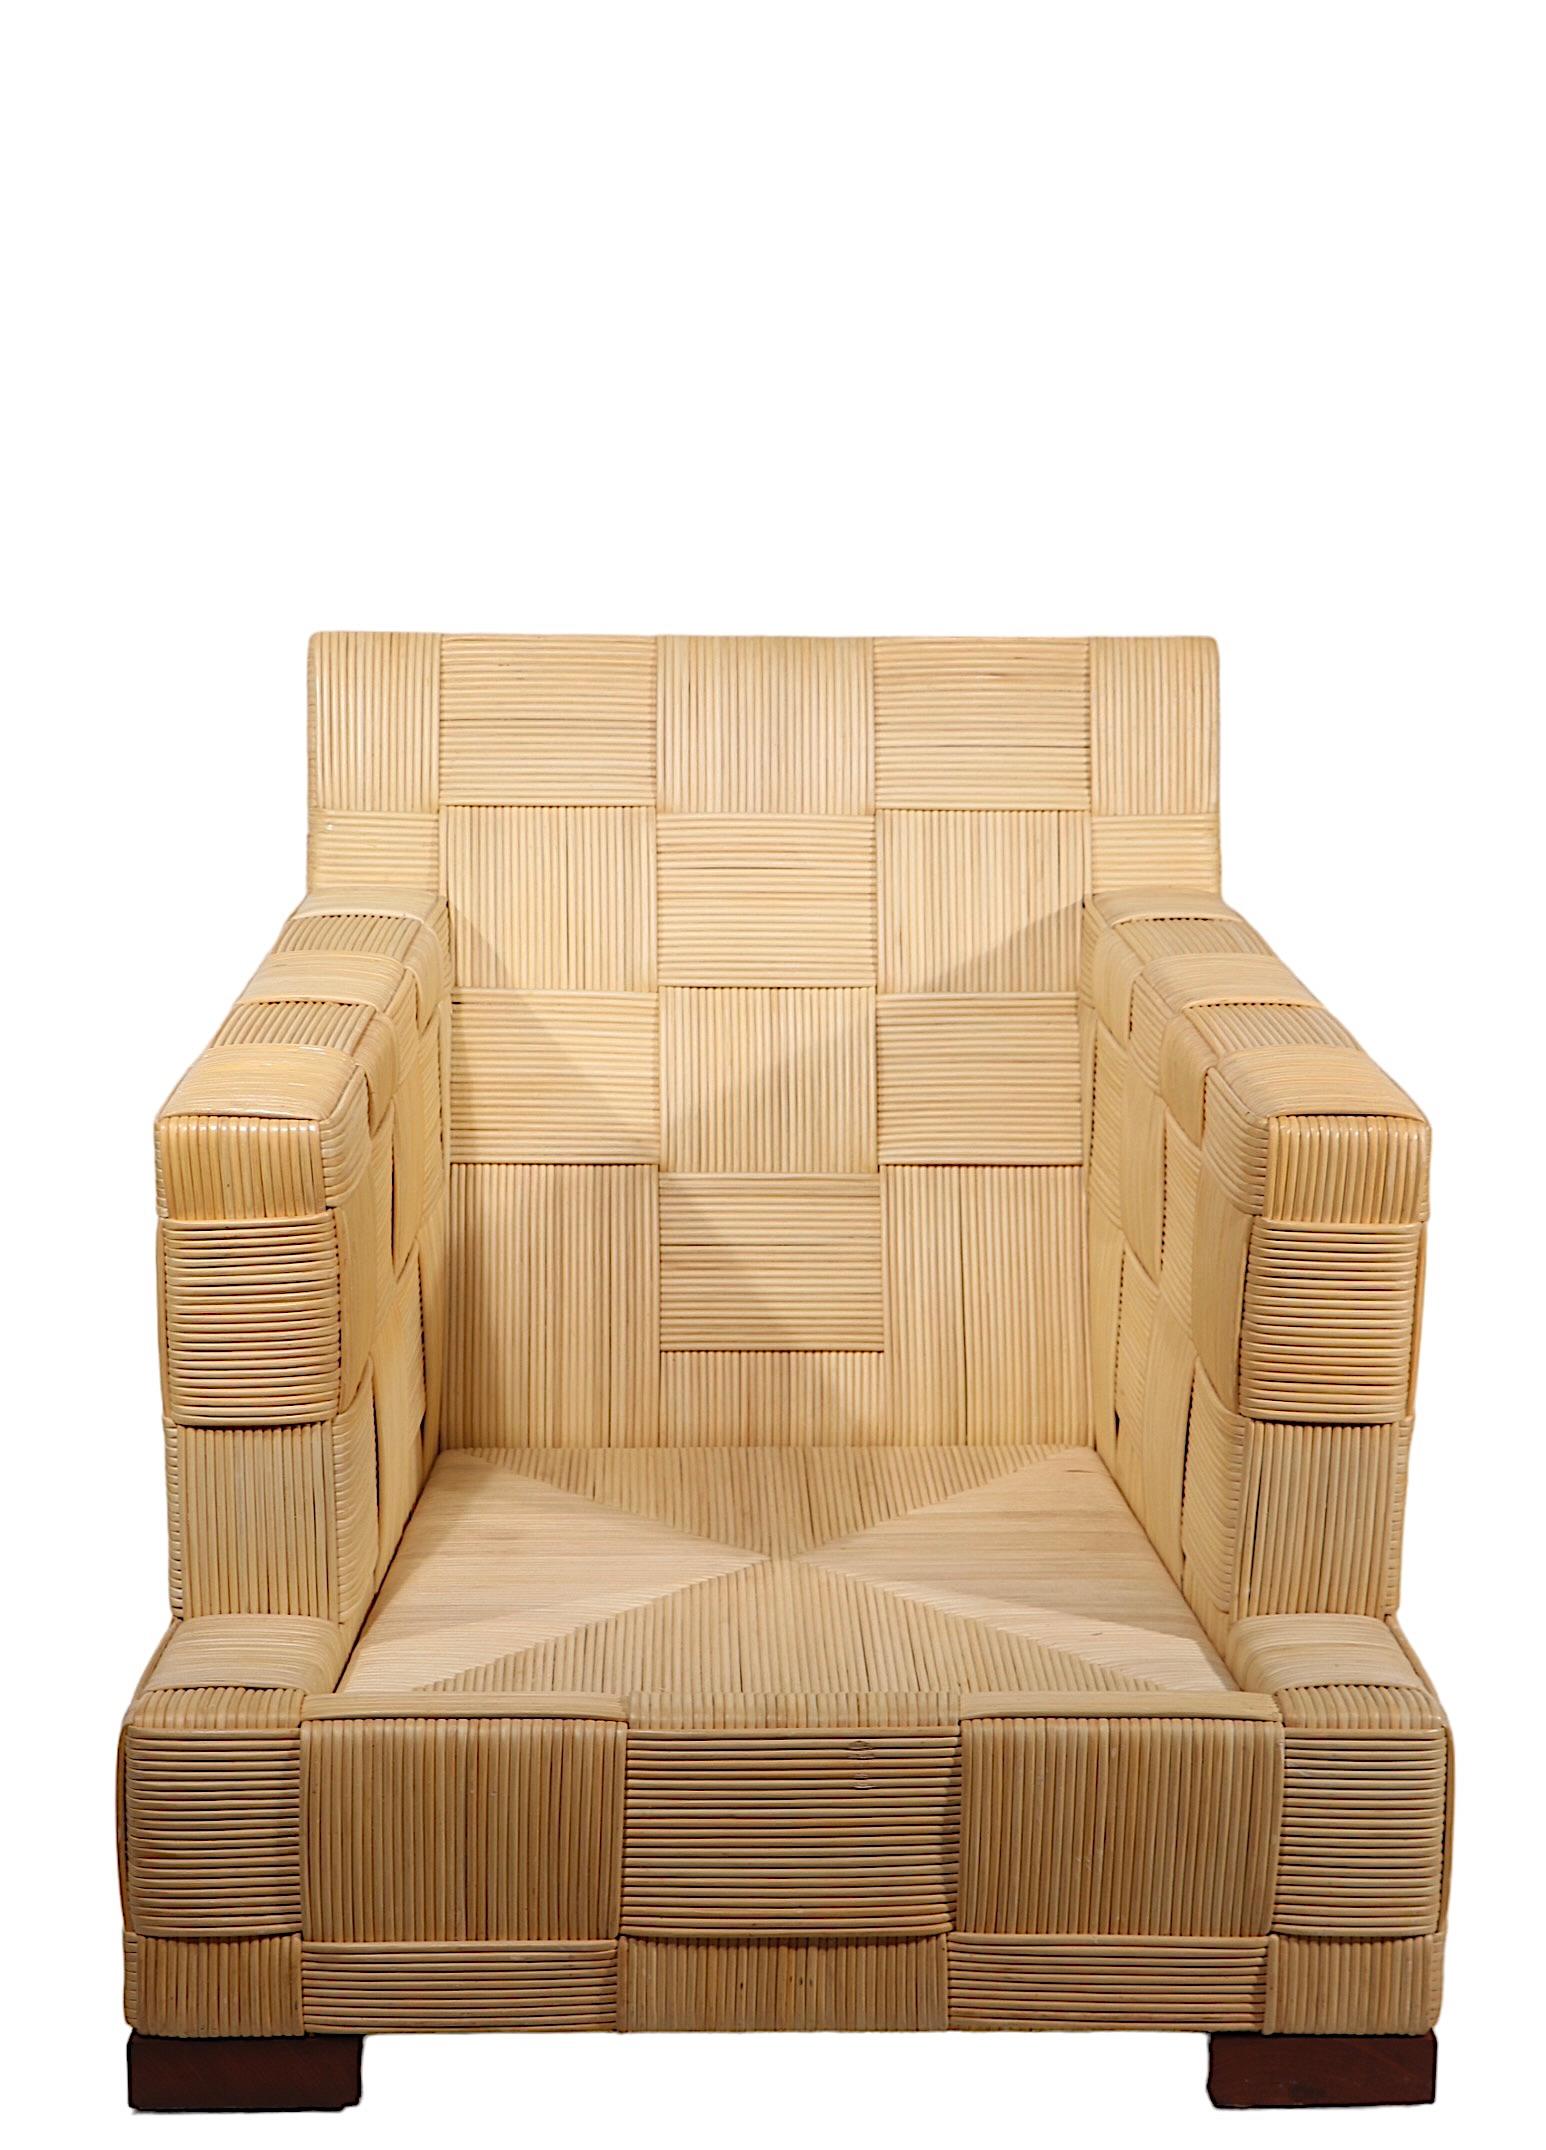 Block Island Club Chair by John Hutton for Donghia c 1990's  For Sale 12